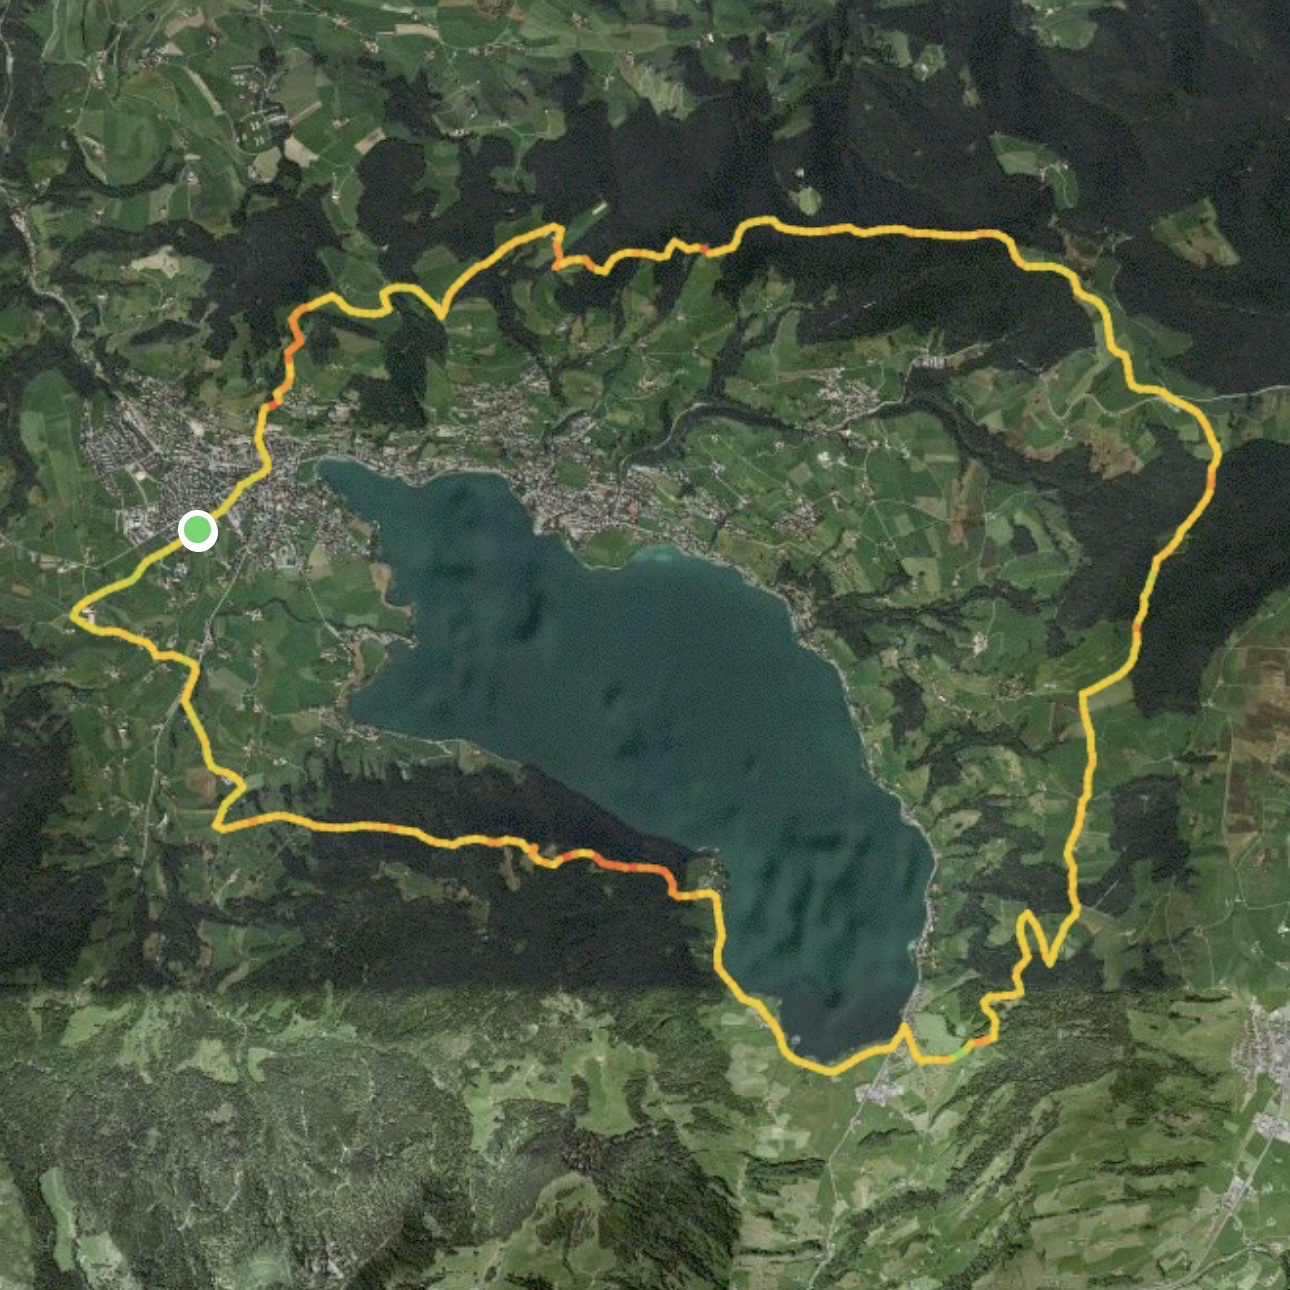 Satellite view showing a lake with a GPS track forming a loop around it.